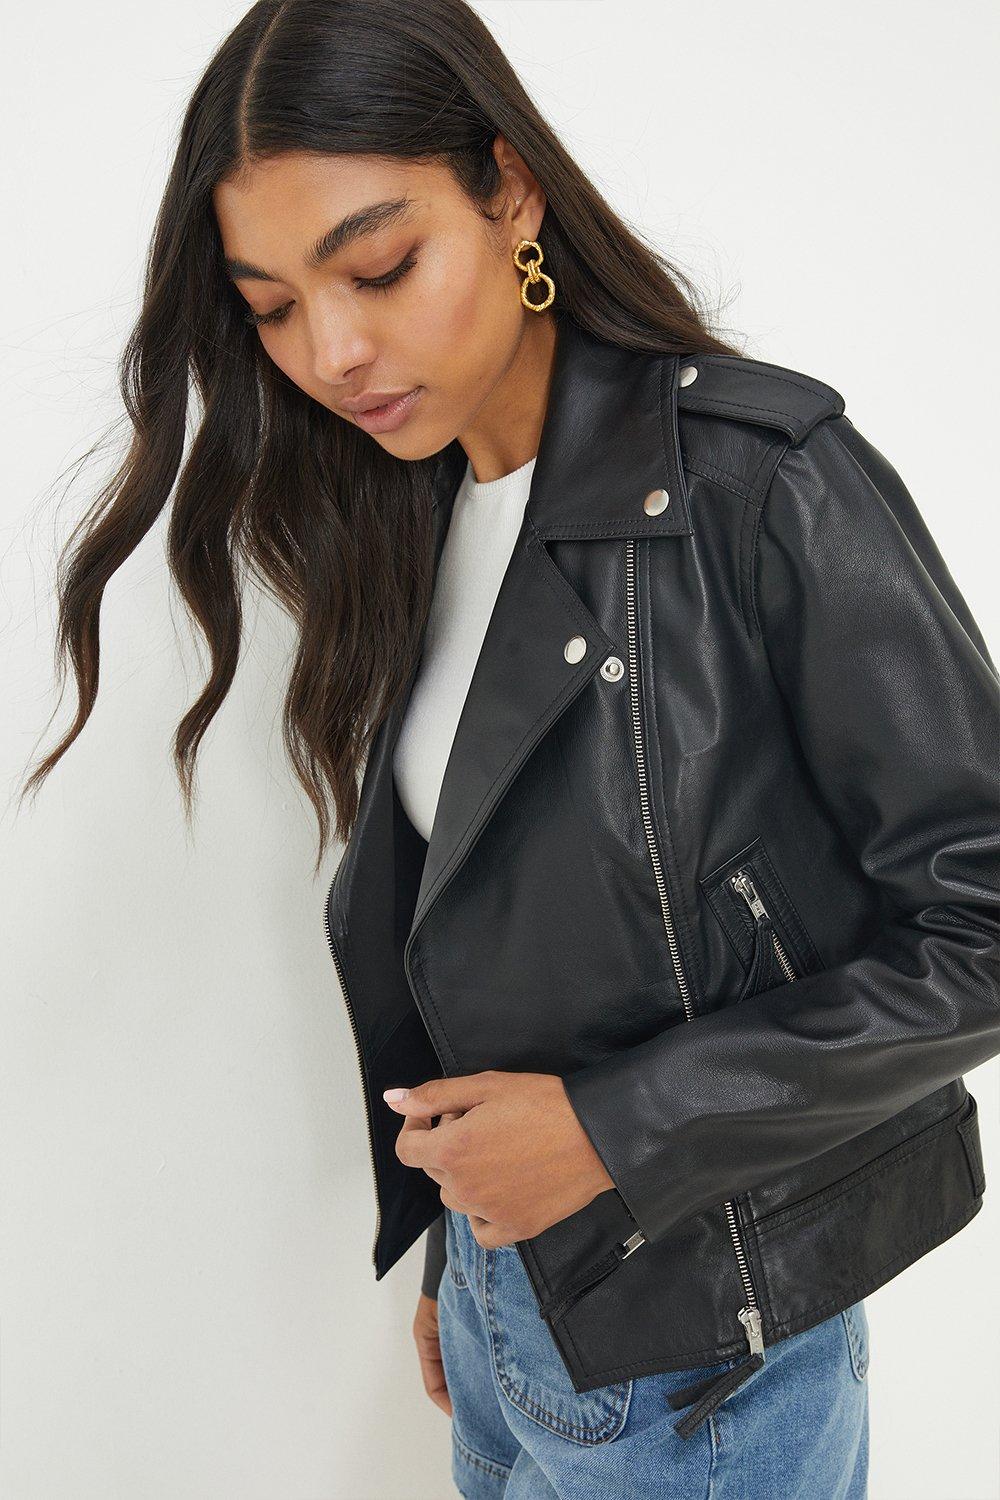 Women’s Boxy Cropped Real Leather Jacket - black - S